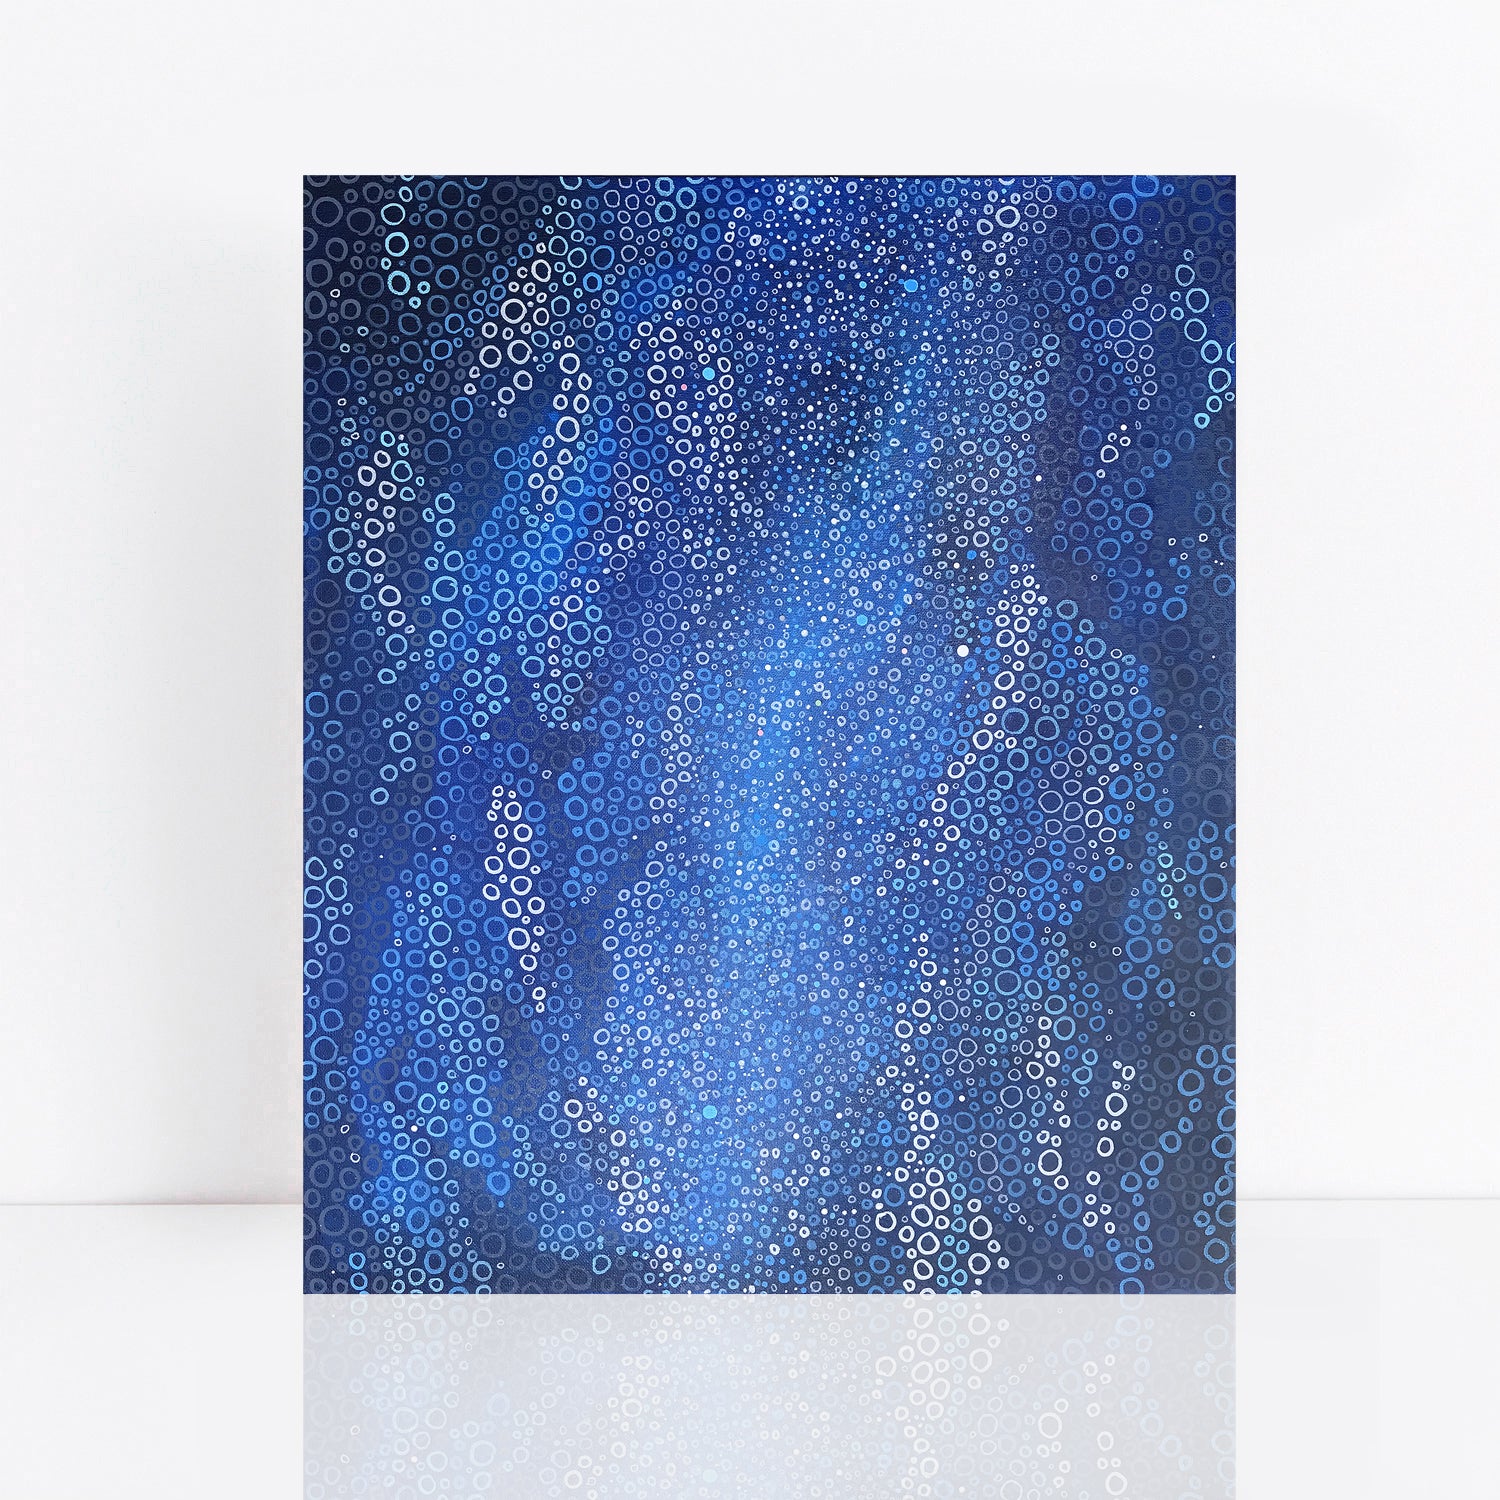 abstract blue dot painting like night sky